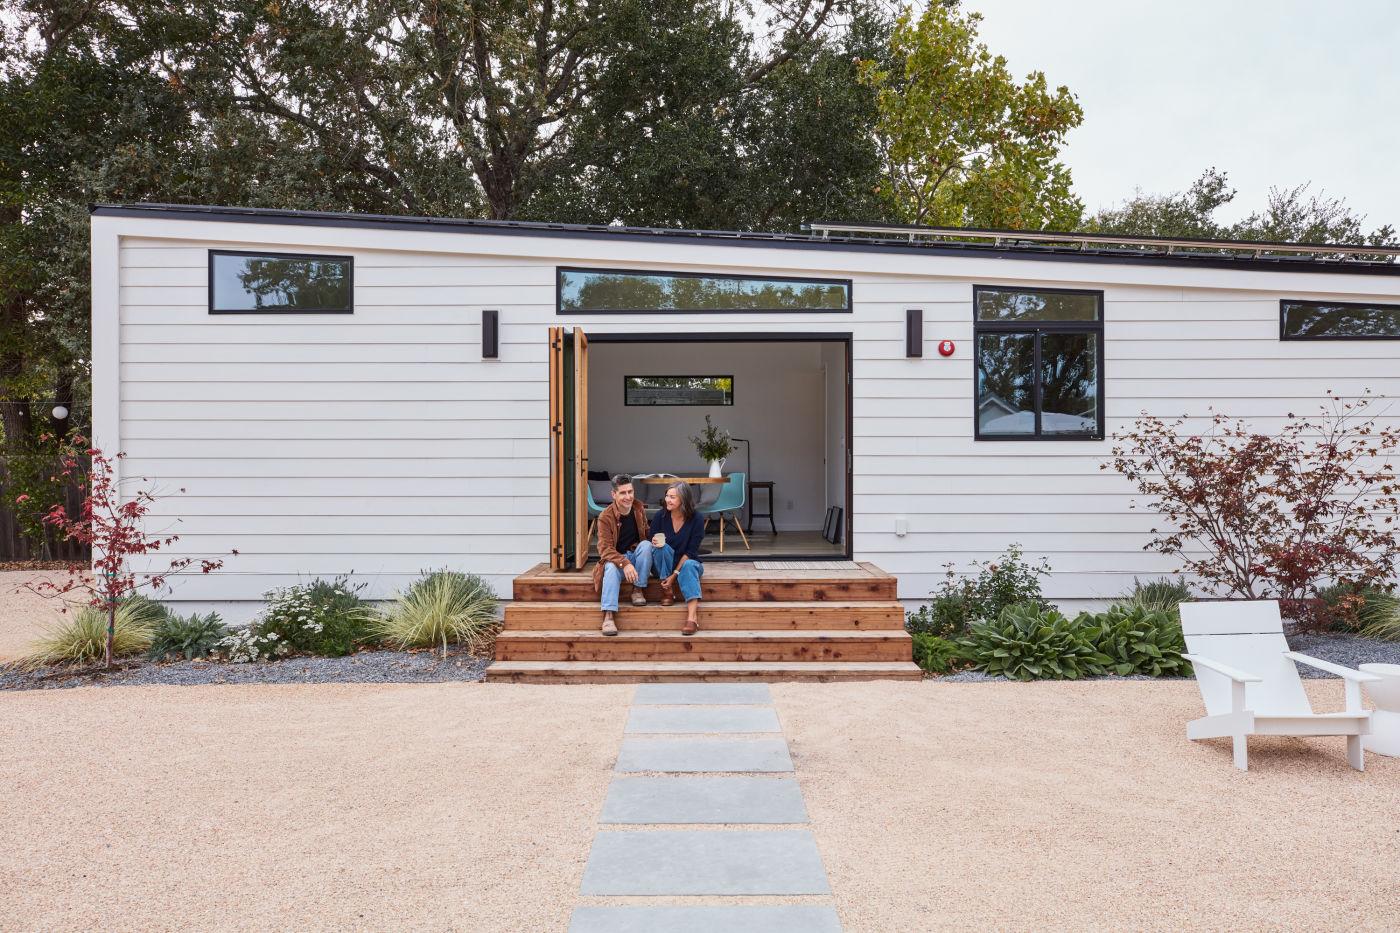 See how we use the $425,000 tiny home in our backyard